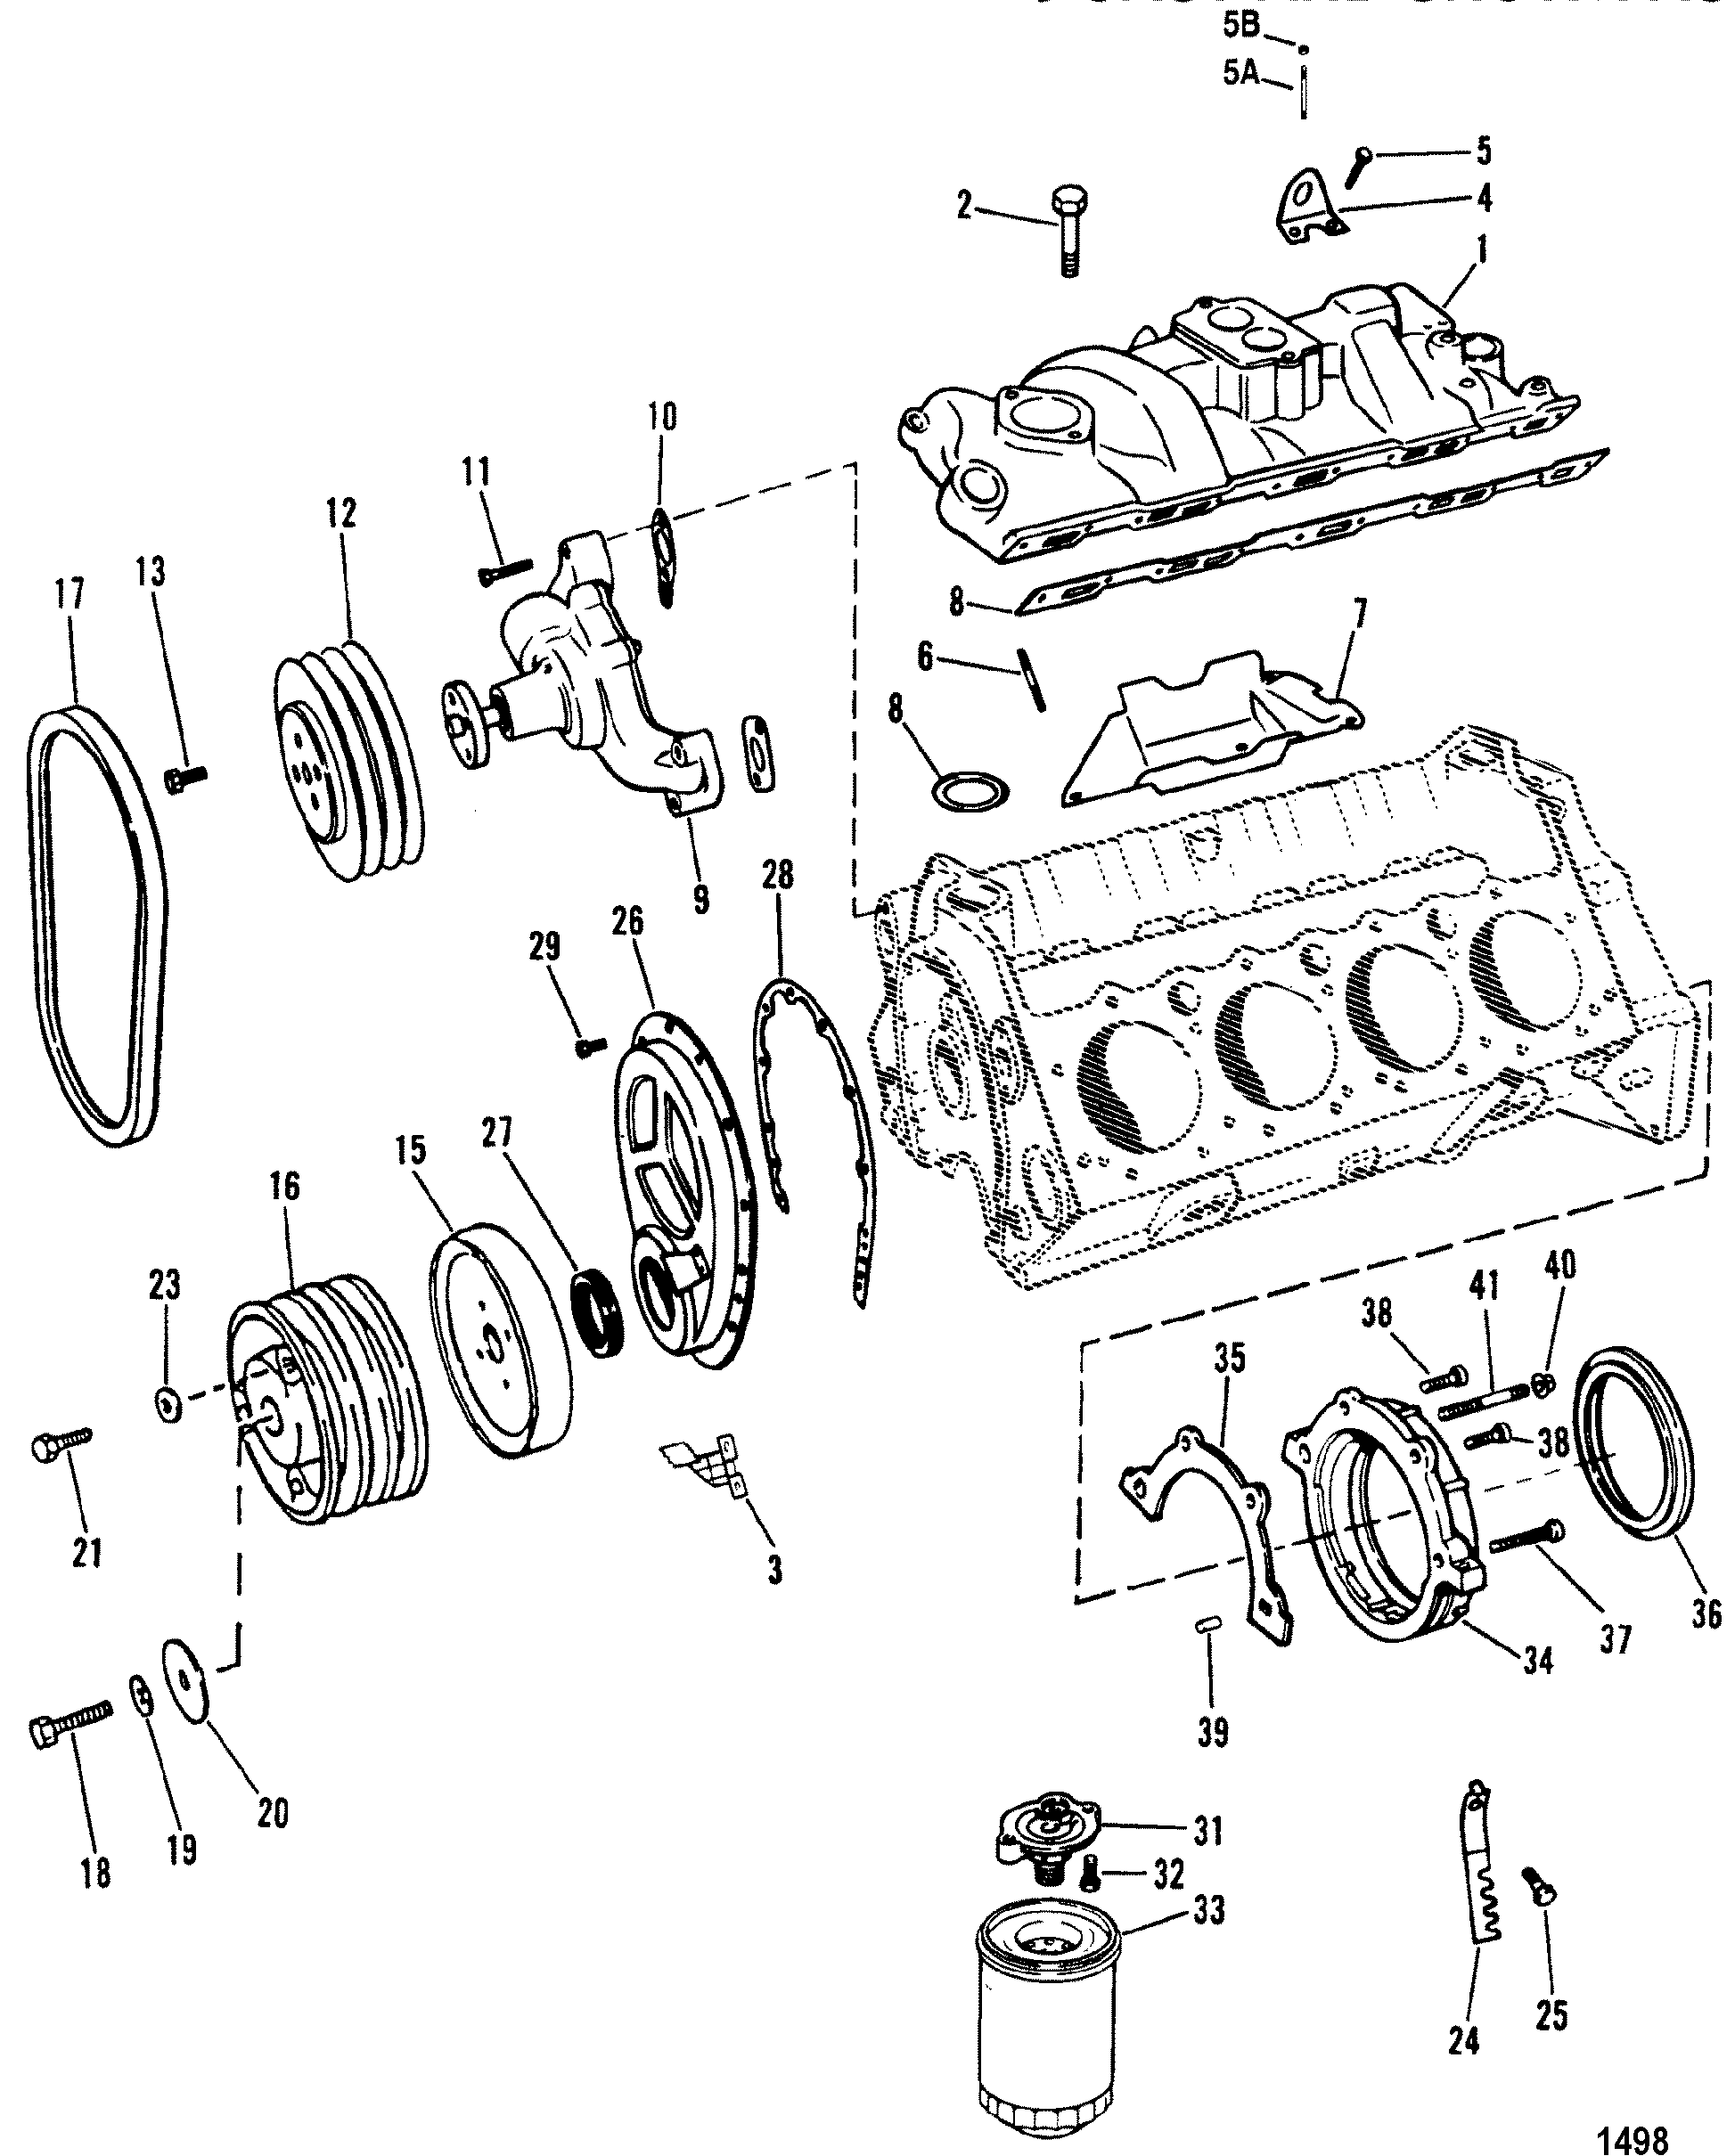 INTAKE MANIFOLD AND FRONT COVER(DESIGN II)